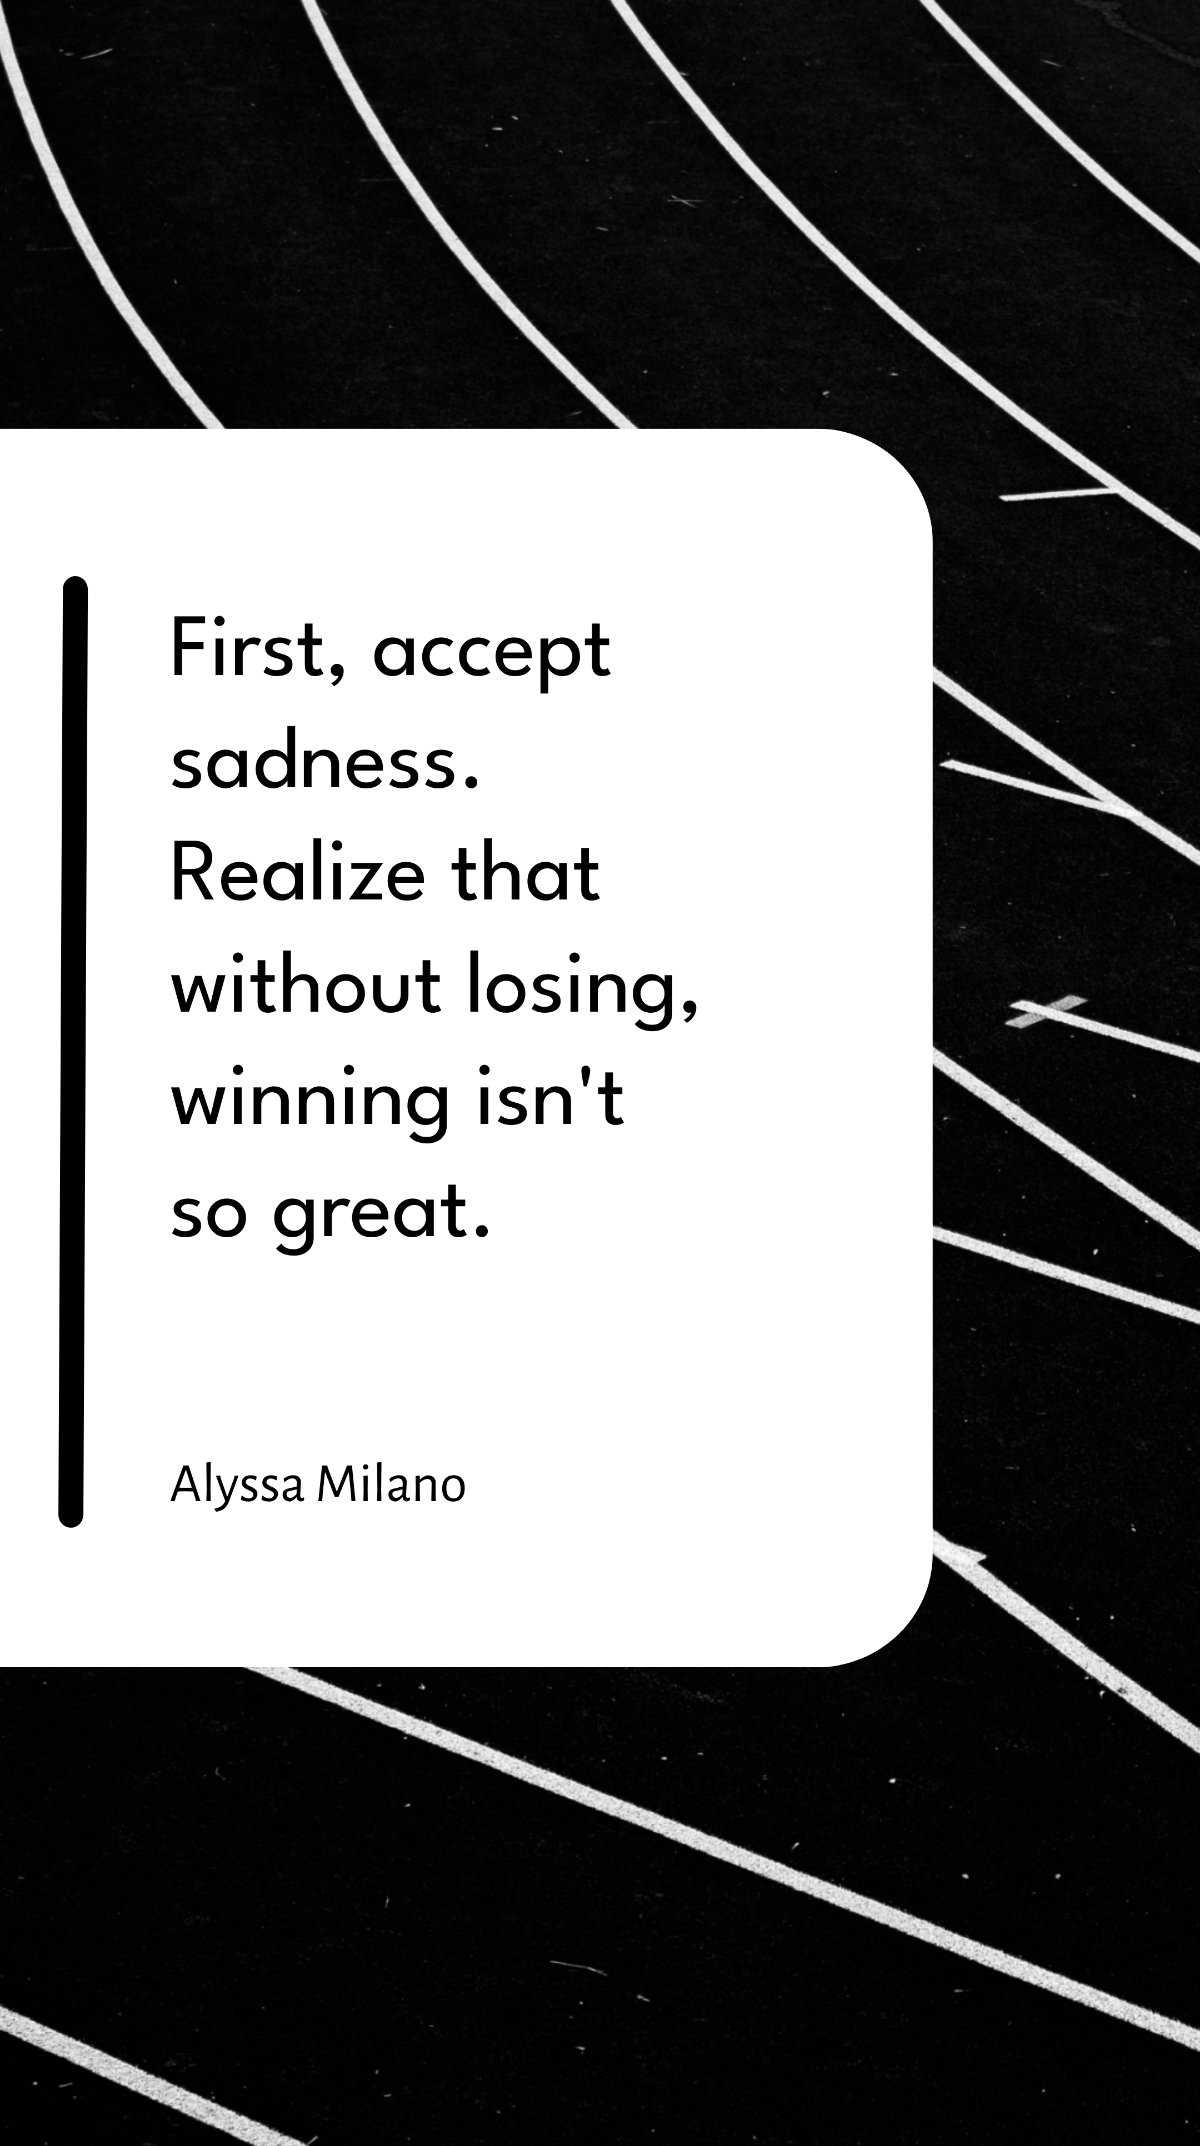 Alyssa Milano - First, accept sadness. Realize that without losing, winning isn't so great. Template